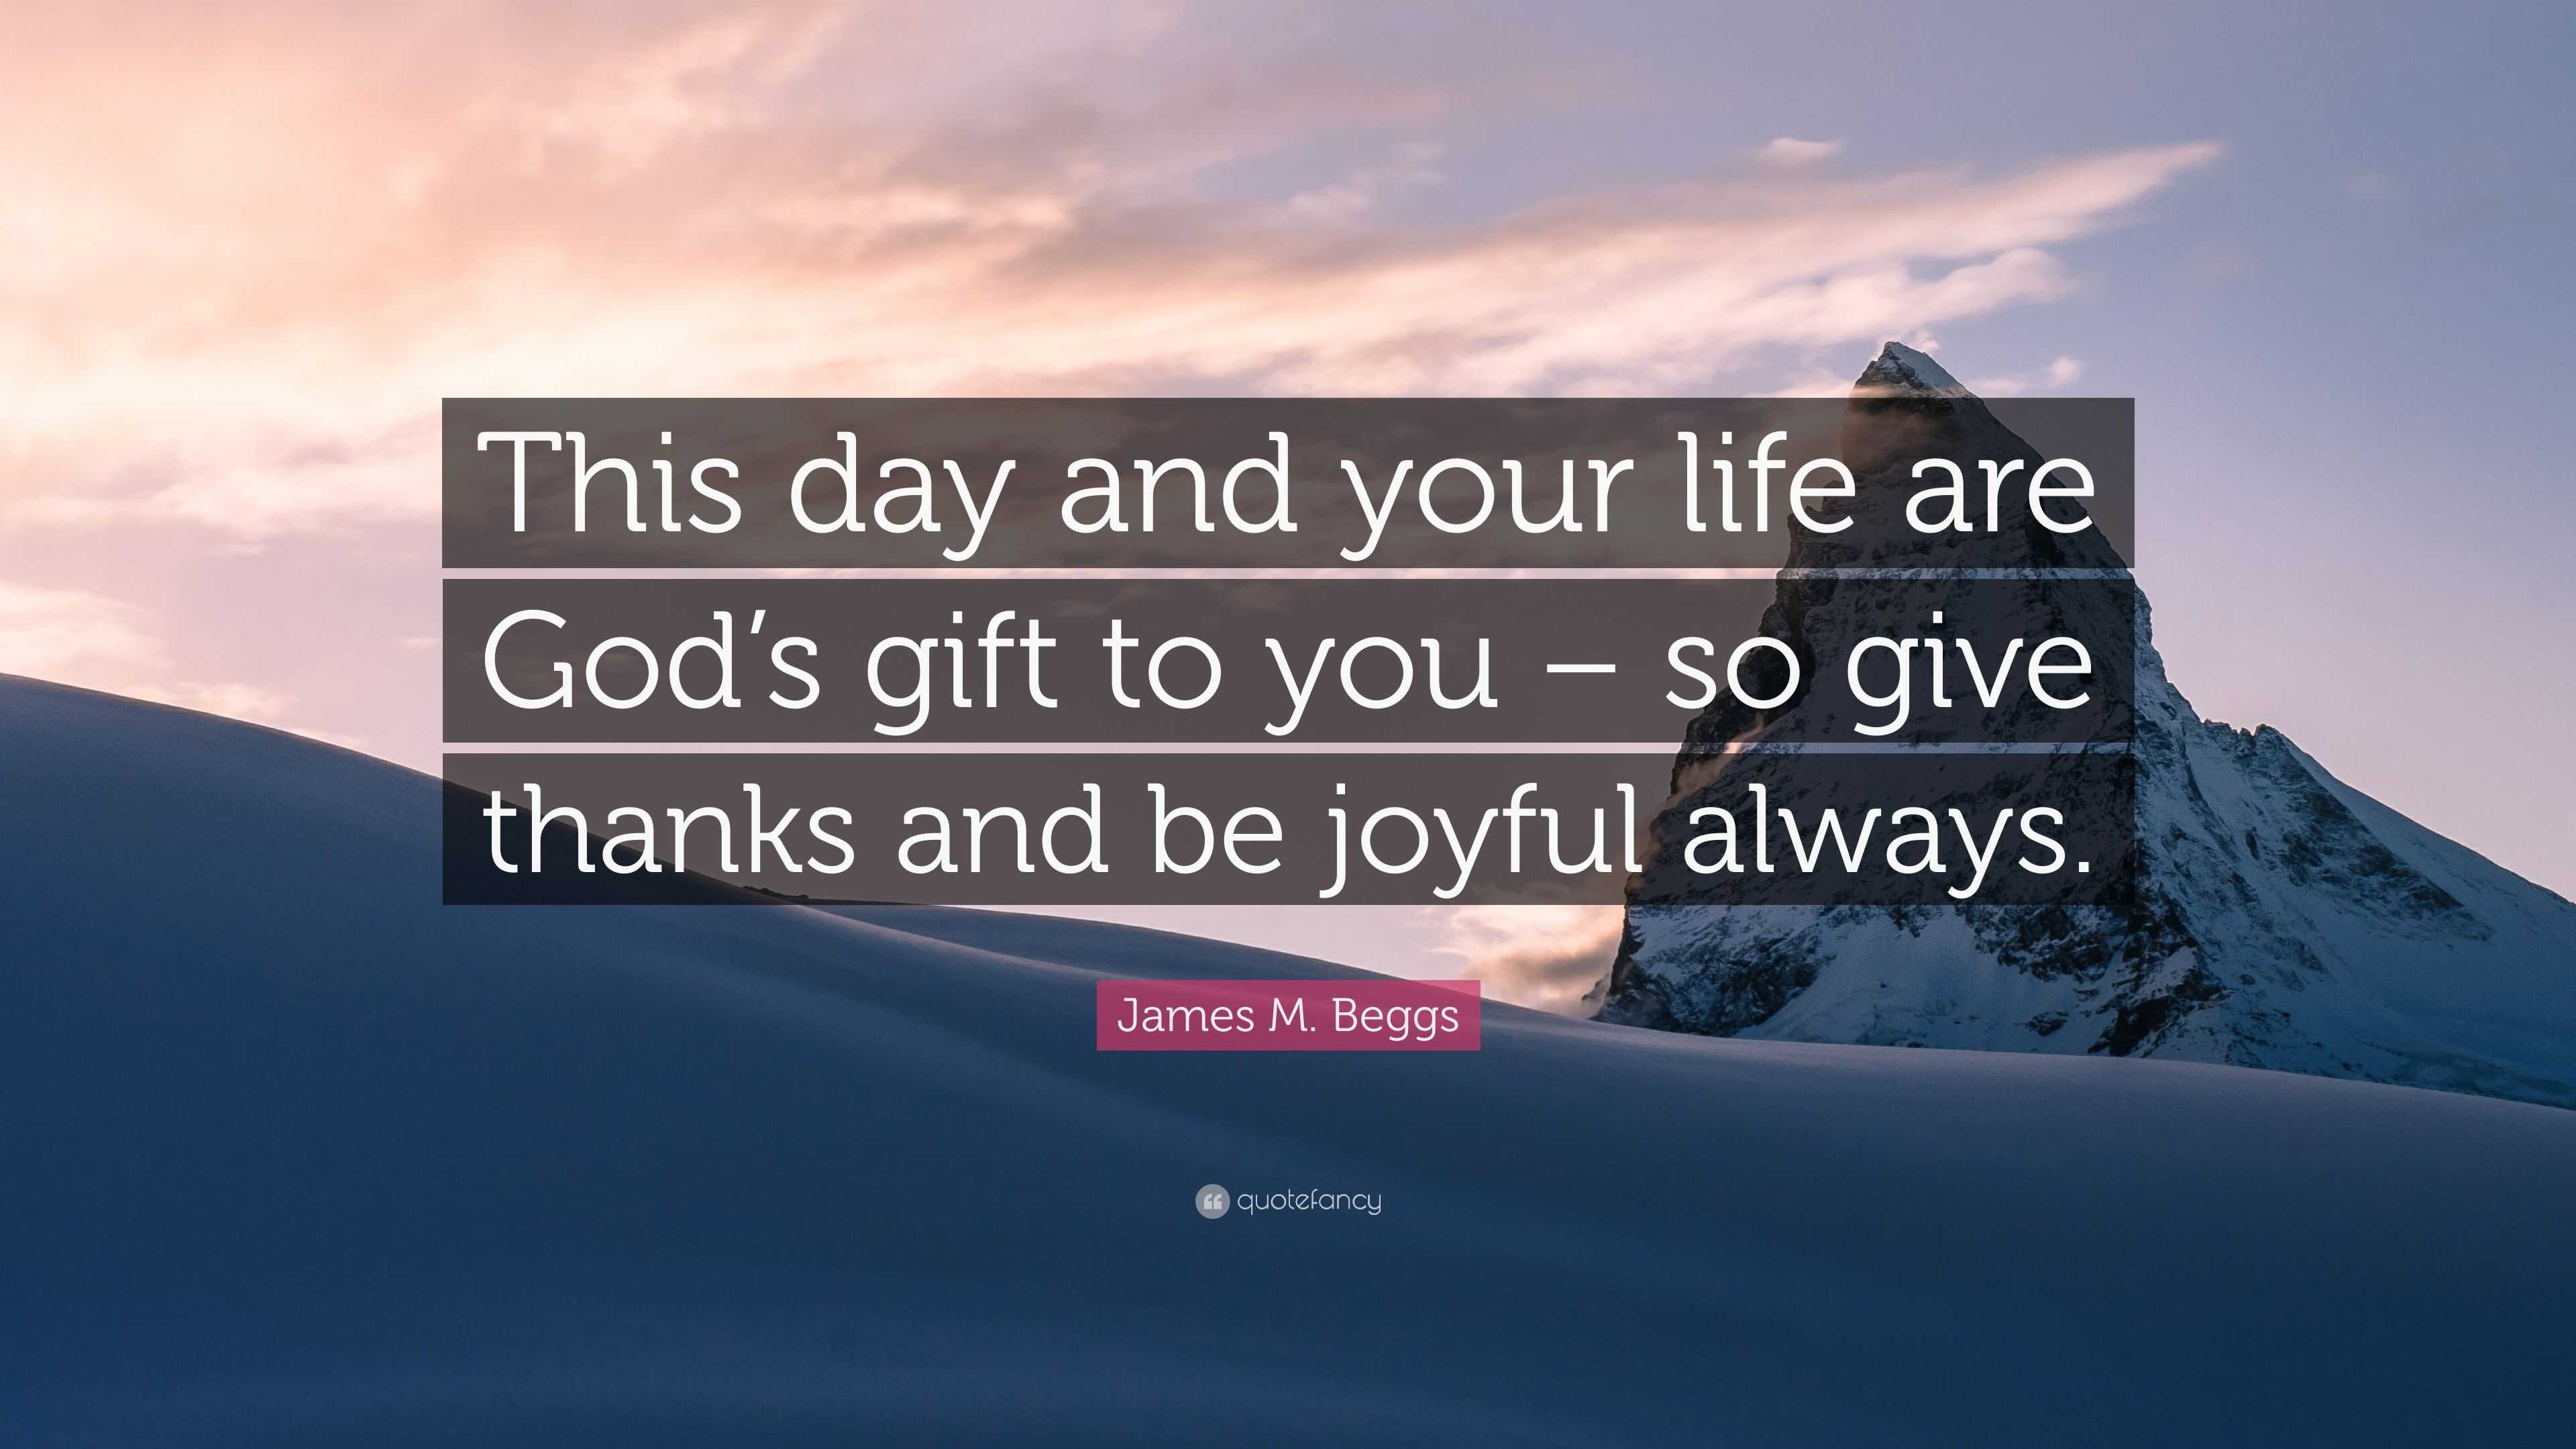 James M Beggs Quote This Day And Your Life Are God S Gift To You So Give Thanks And Be Joyful Always 7 Wallpapers Quotefancy